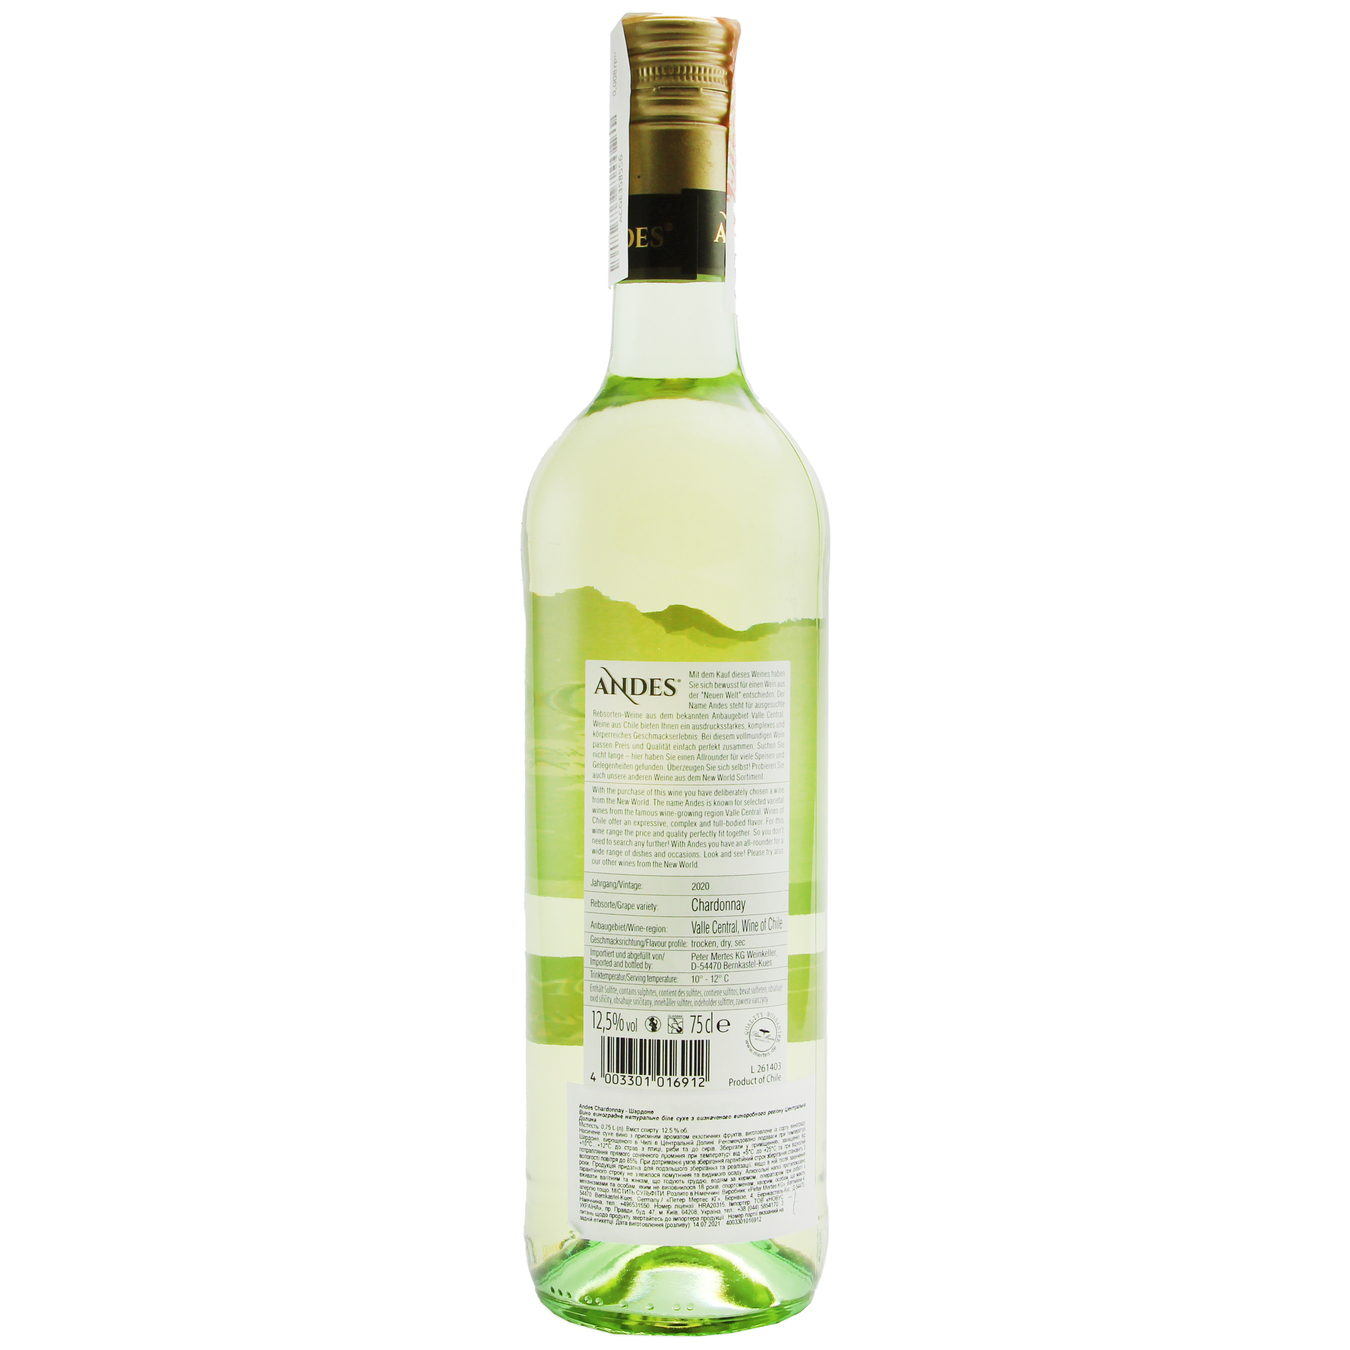 Andes Chardonnay white dry wine 13.5% 0,75l 2